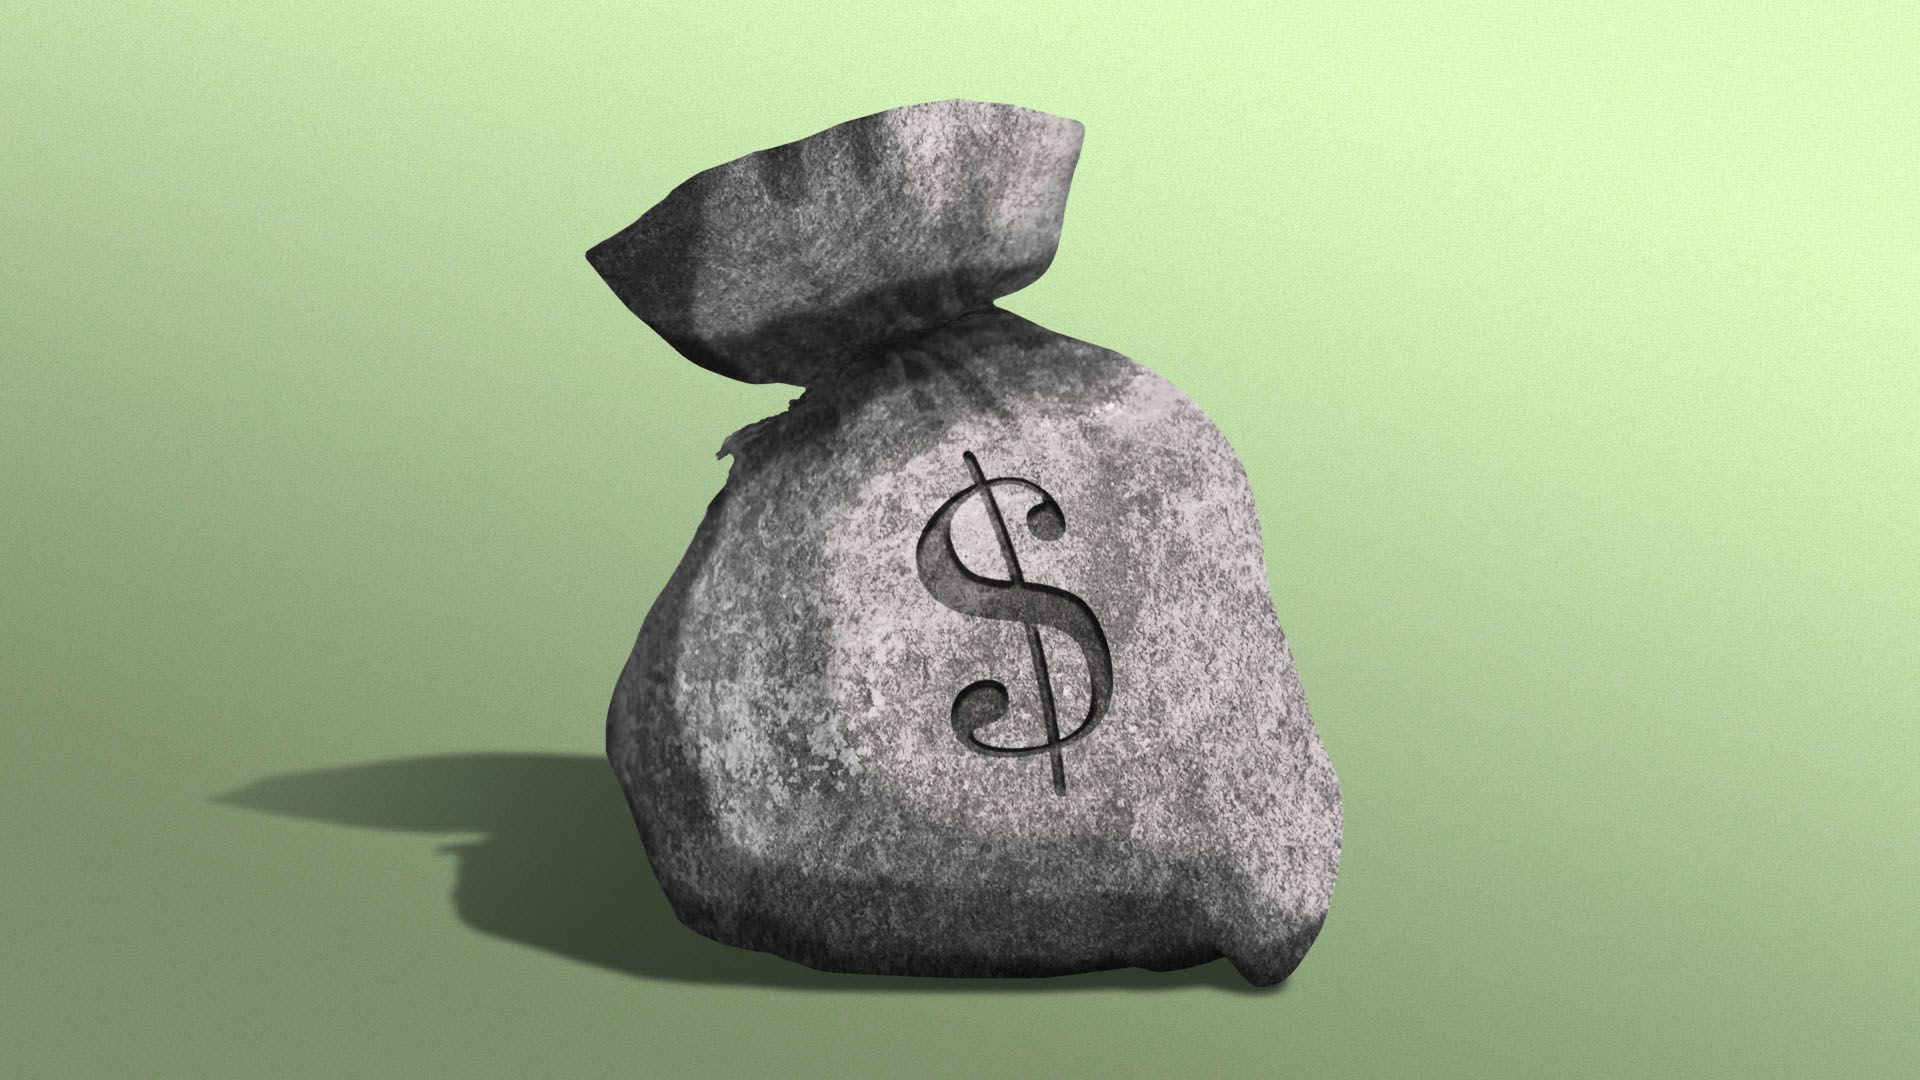 An illustration of a money bag made of concrete